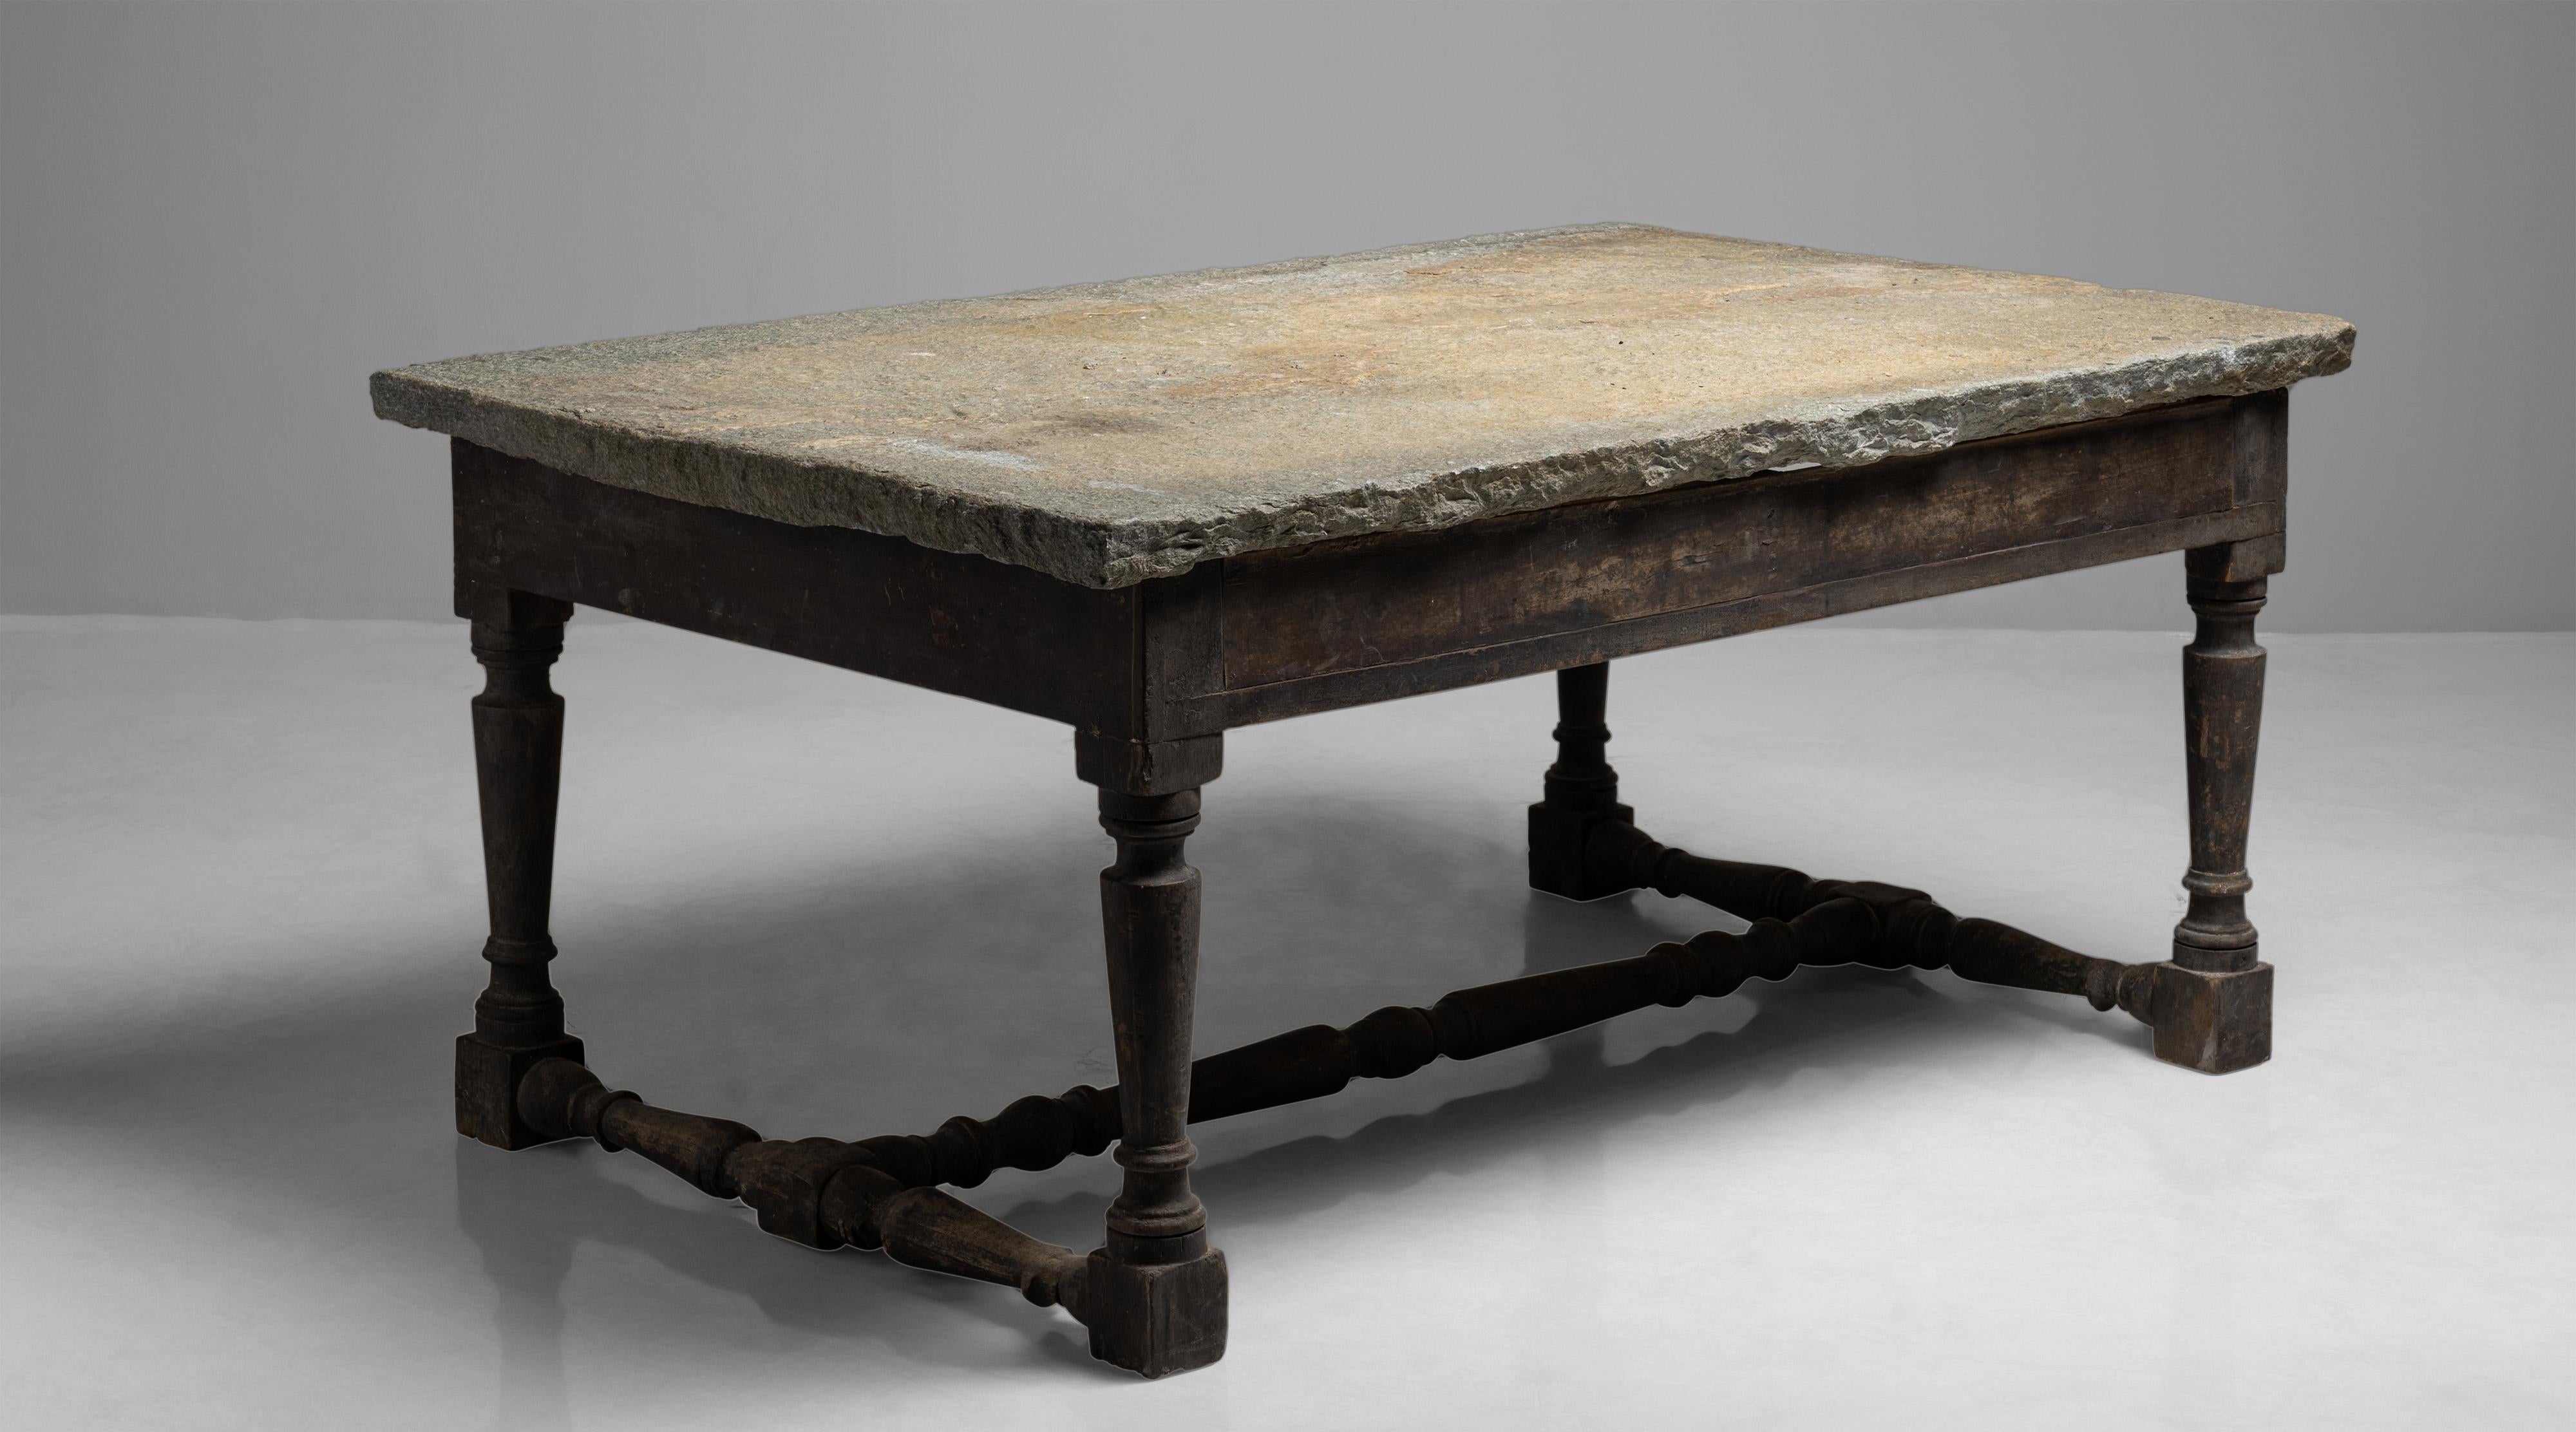 Primitive table with granite top

circa 1900

Substantial slab of granite on top of weathered oak base, with turned legs and stretcher.

Measures: 63.5” W x 40.5” D x 28.75” H.

$ 12,500.


 